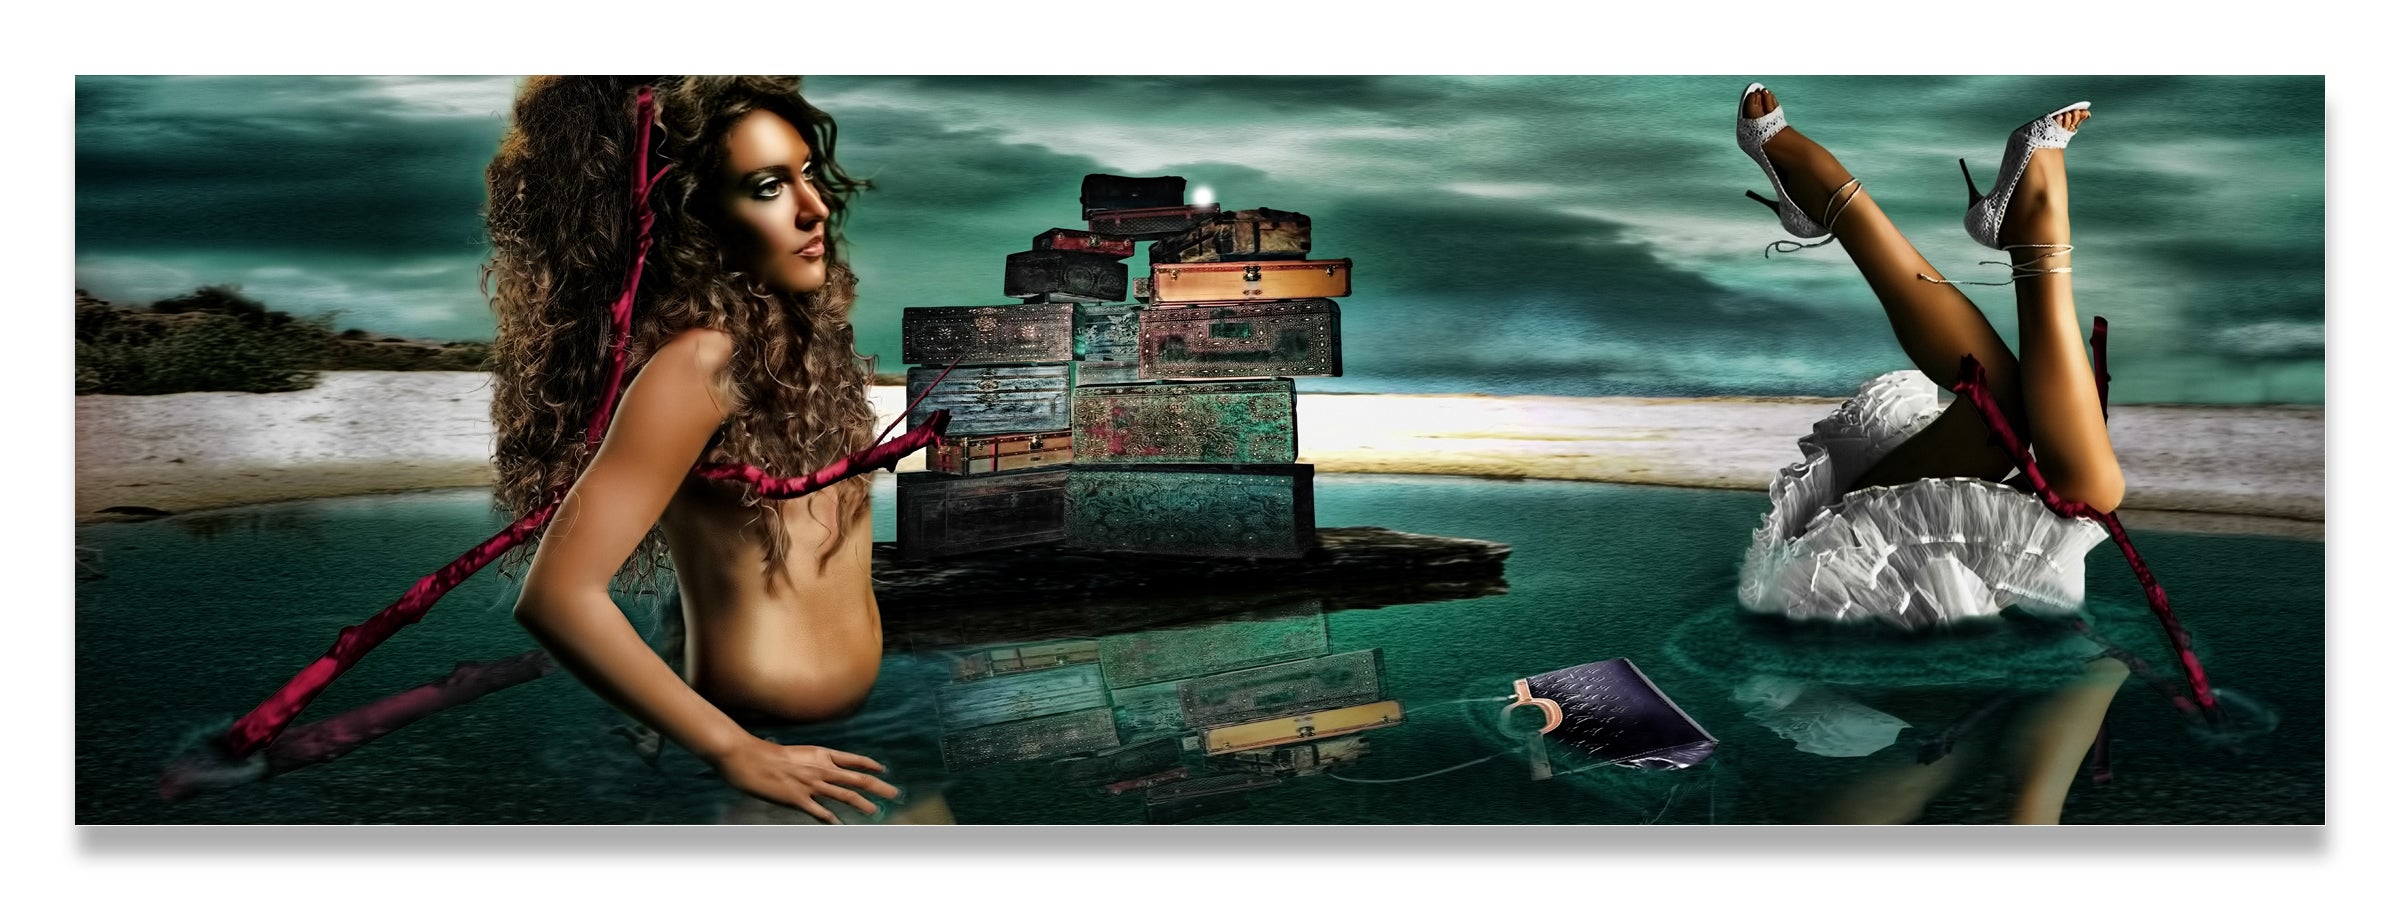 Louii Vuitton vs Salvador Dali- Disjointed Woman Floating in Water with Red Crutches and Surreal Clouds-Metal Print-Aluminum Print